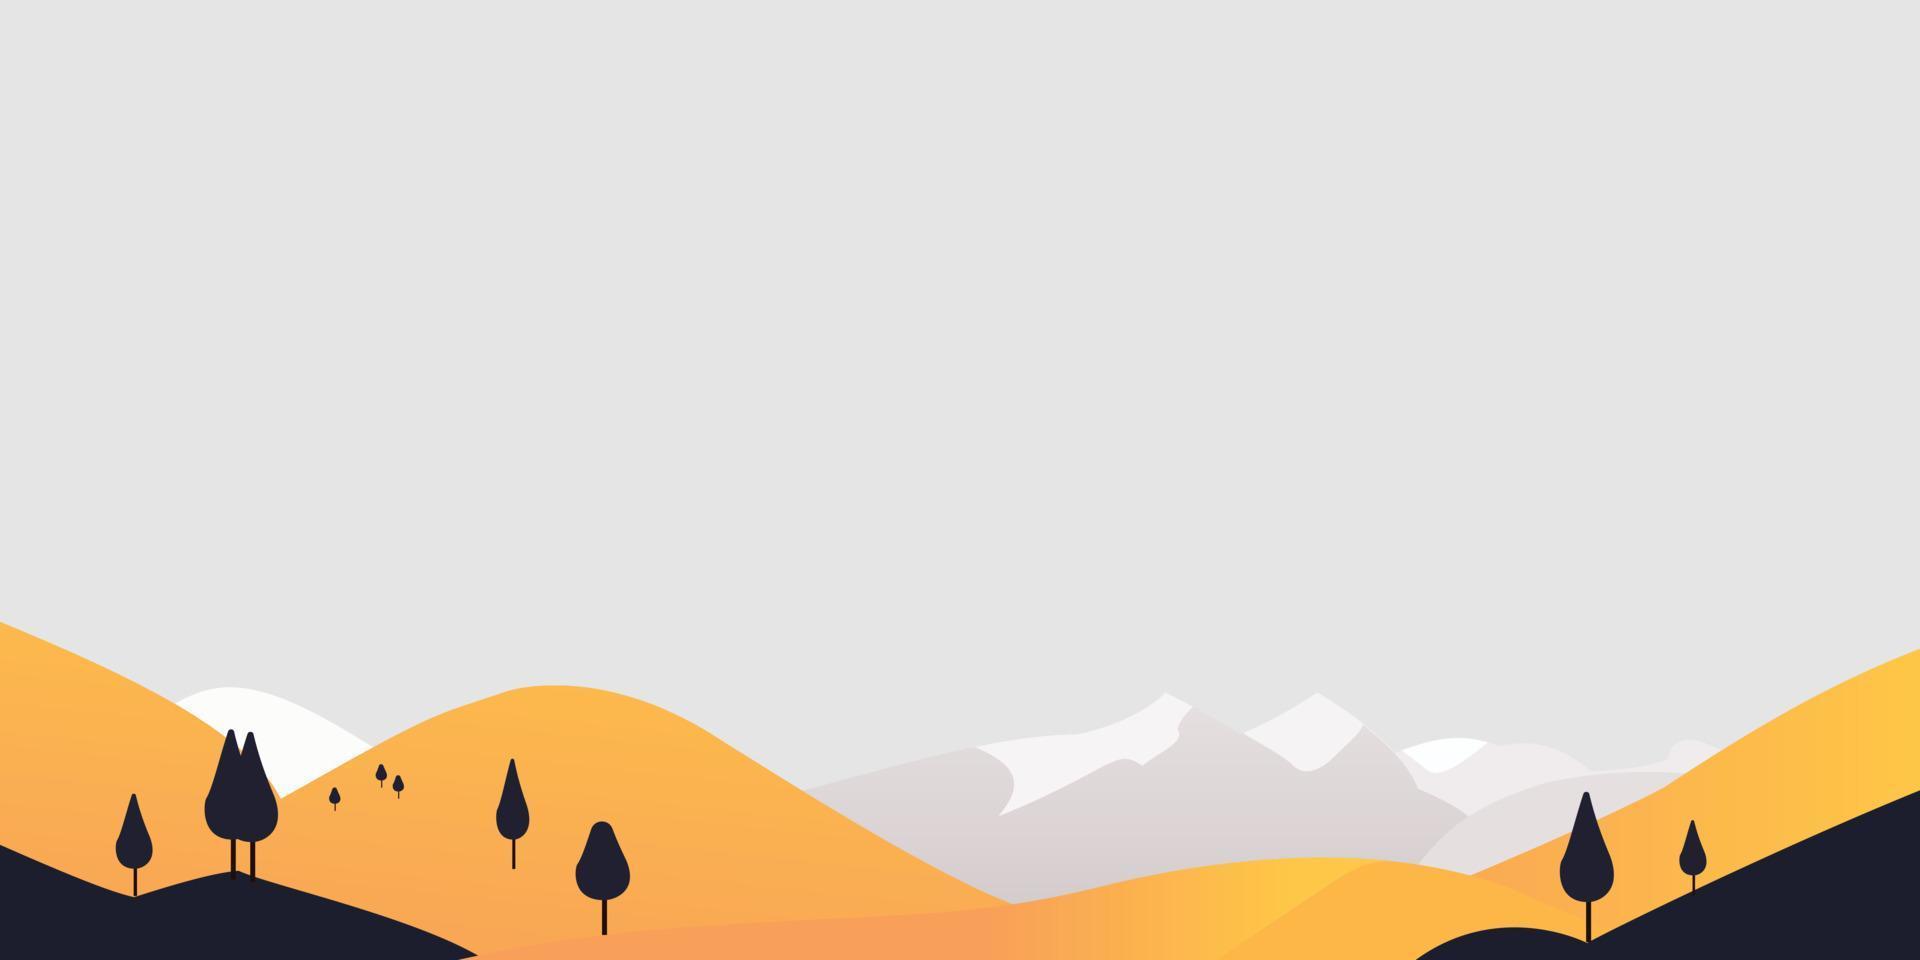 Stunning Background Designs Inspired by the Outdoors vector